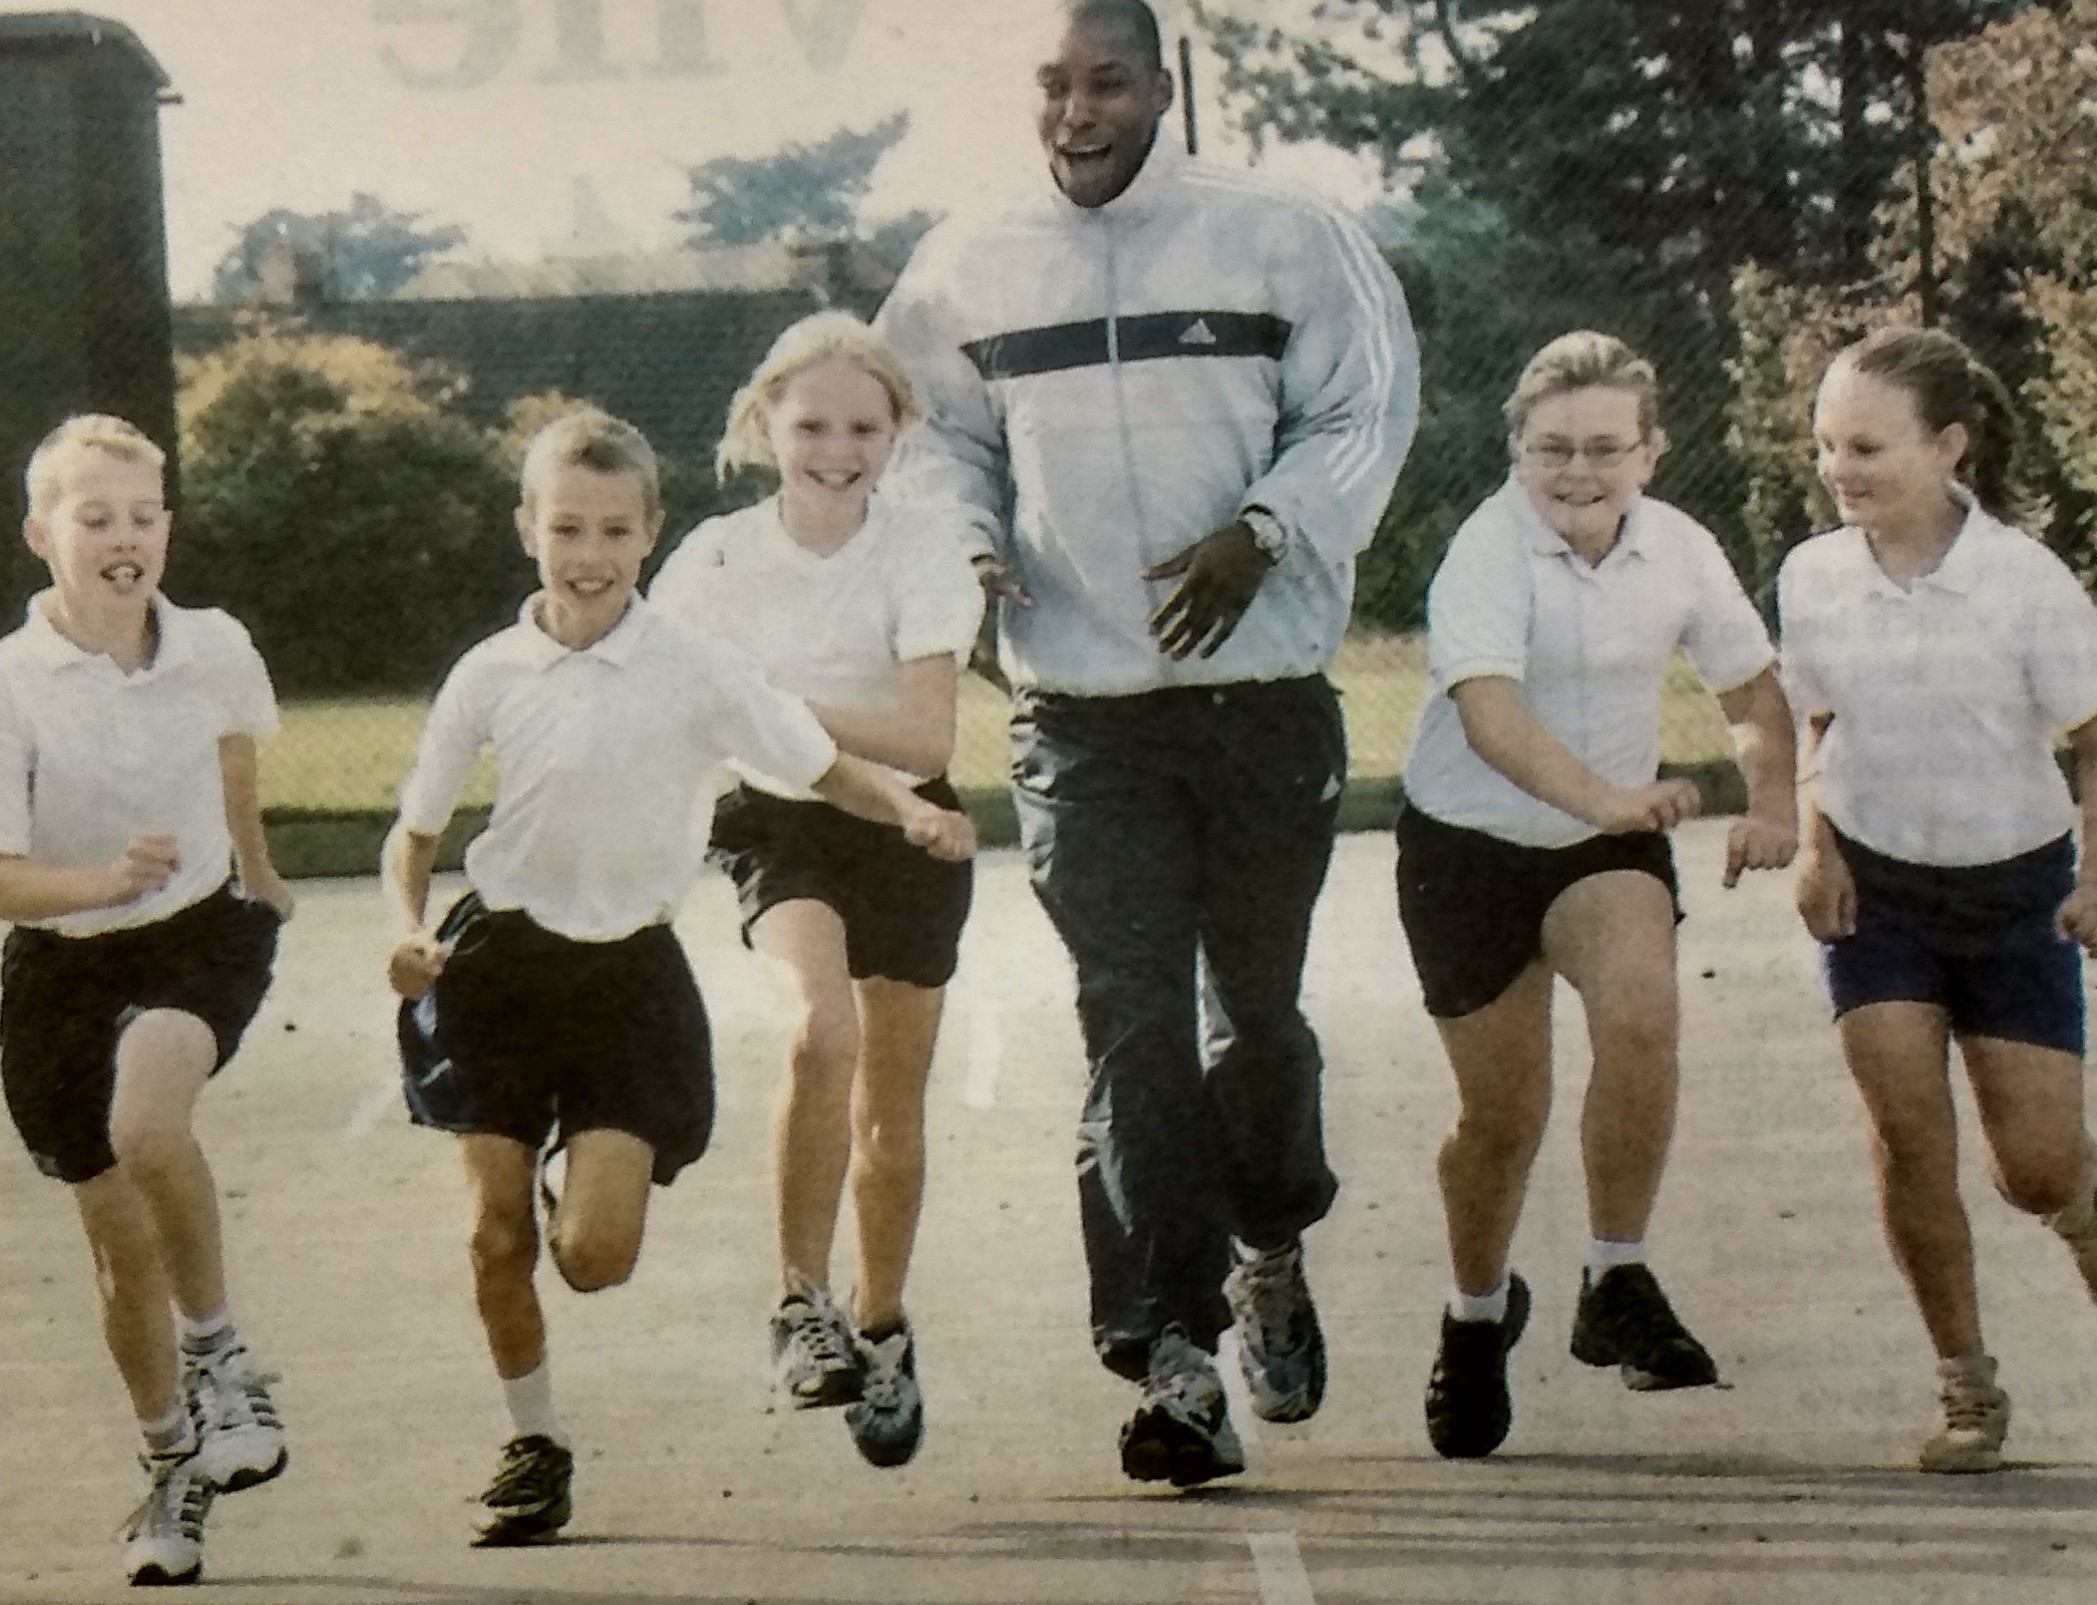 October 2003 and British Olympic bronze medallist Mark Richardson was a guest at Abbey Park Middle School